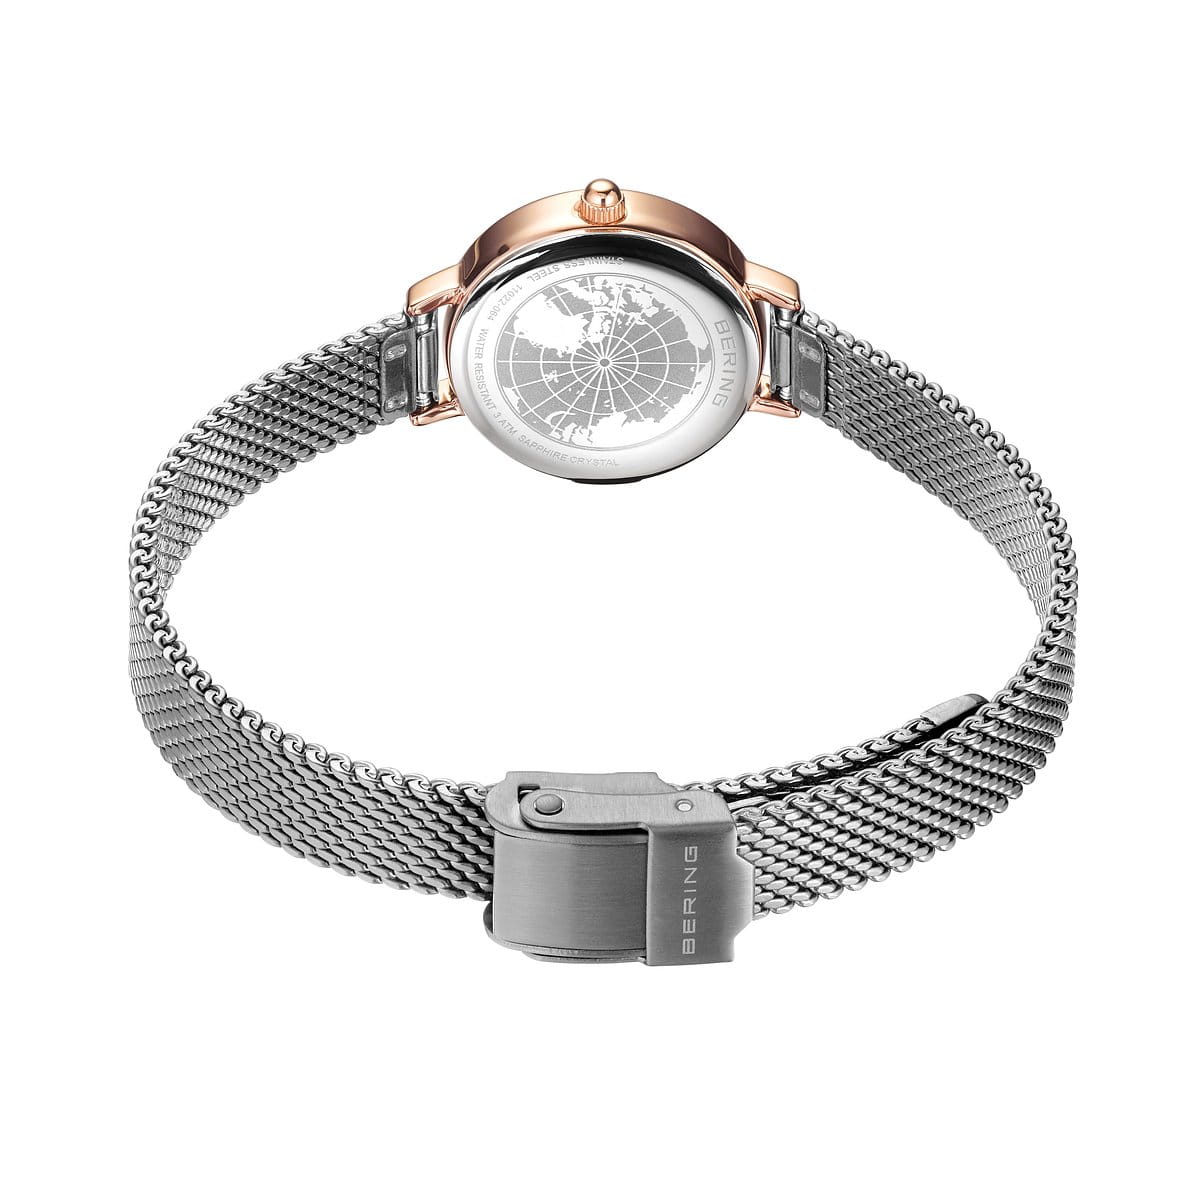 Bering Classic Rose Gold Siver Dial 26mm Watch